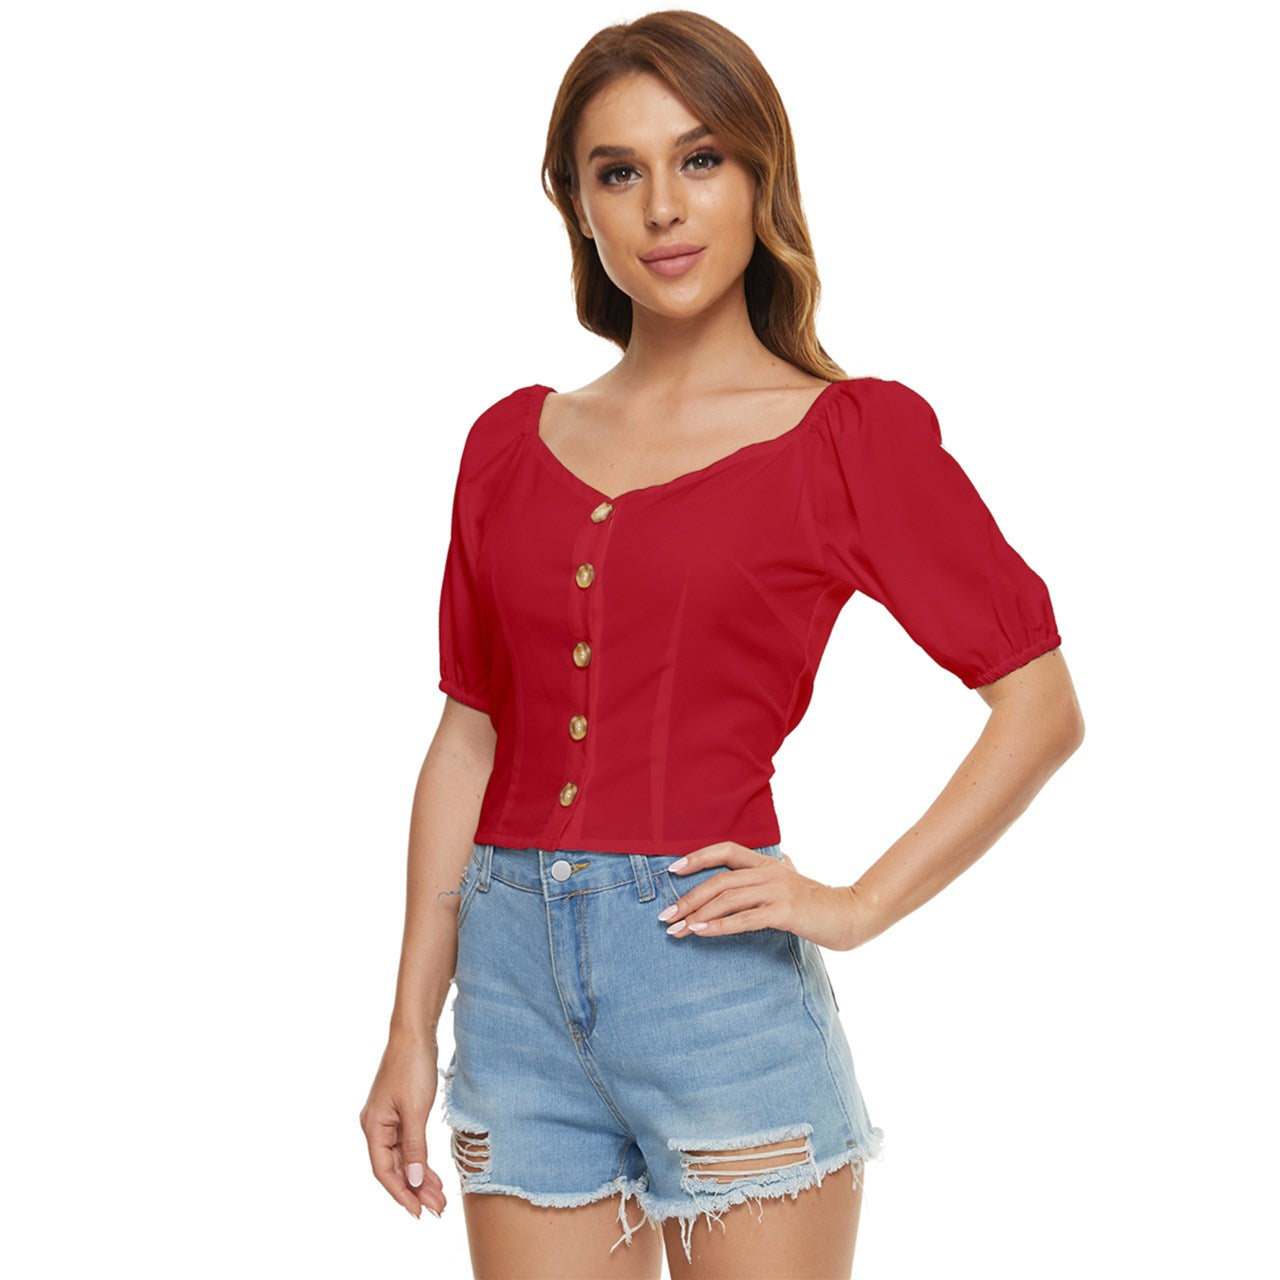 Romance Red Button up blouse